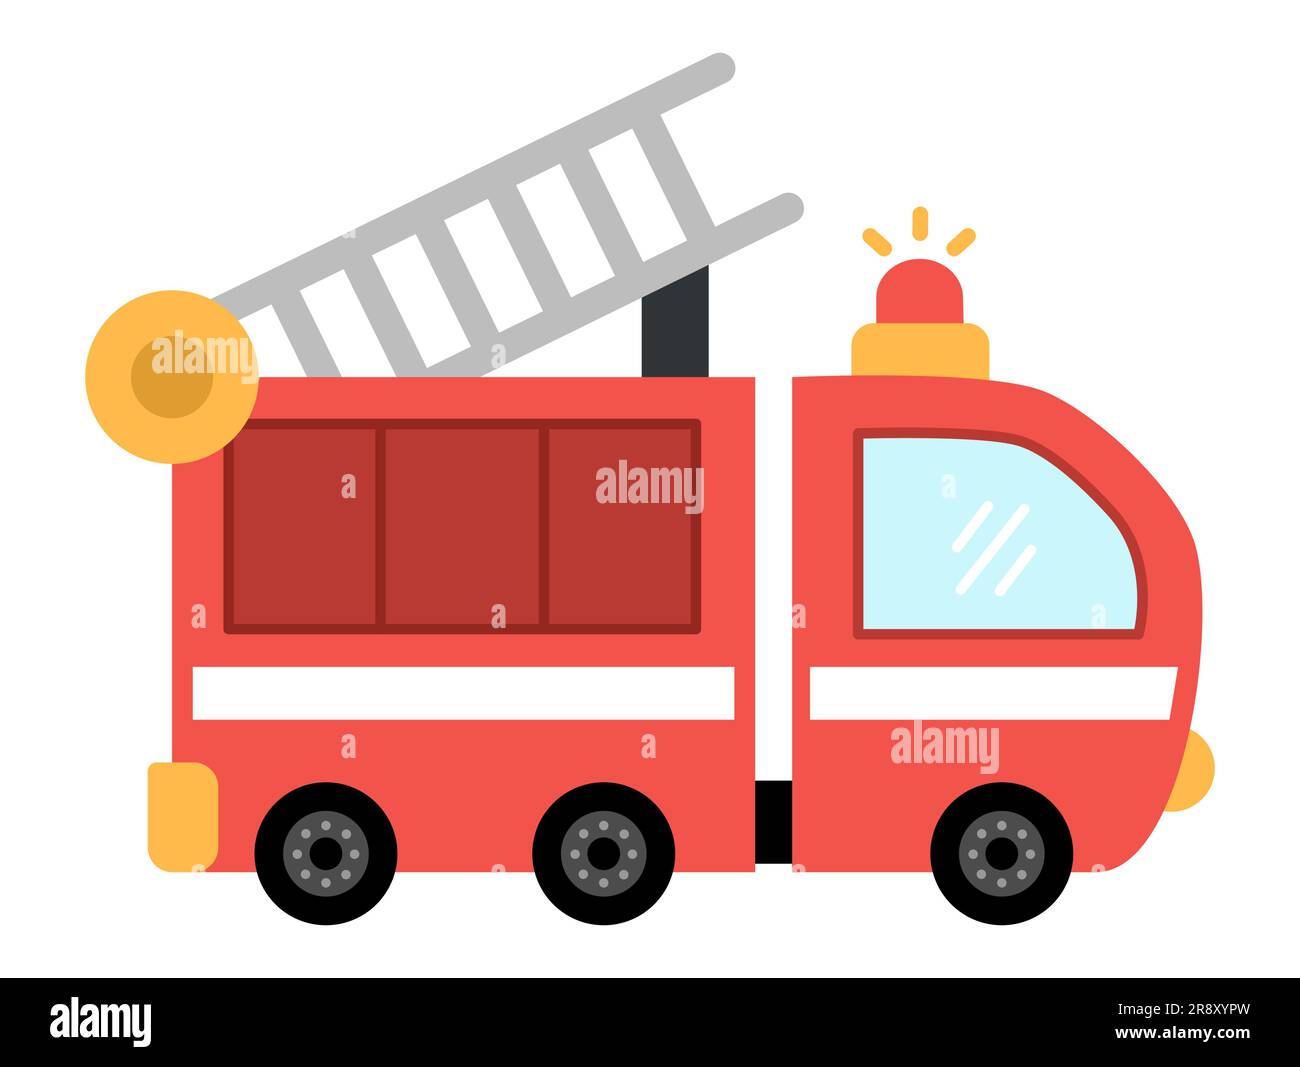 https://c8.alamy.com/comp/2R8XYPW/vector-fire-engine-truck-funny-transportation-for-kids-cute-vehicle-special-transport-icon-isolated-on-white-background-2R8XYPW.jpg